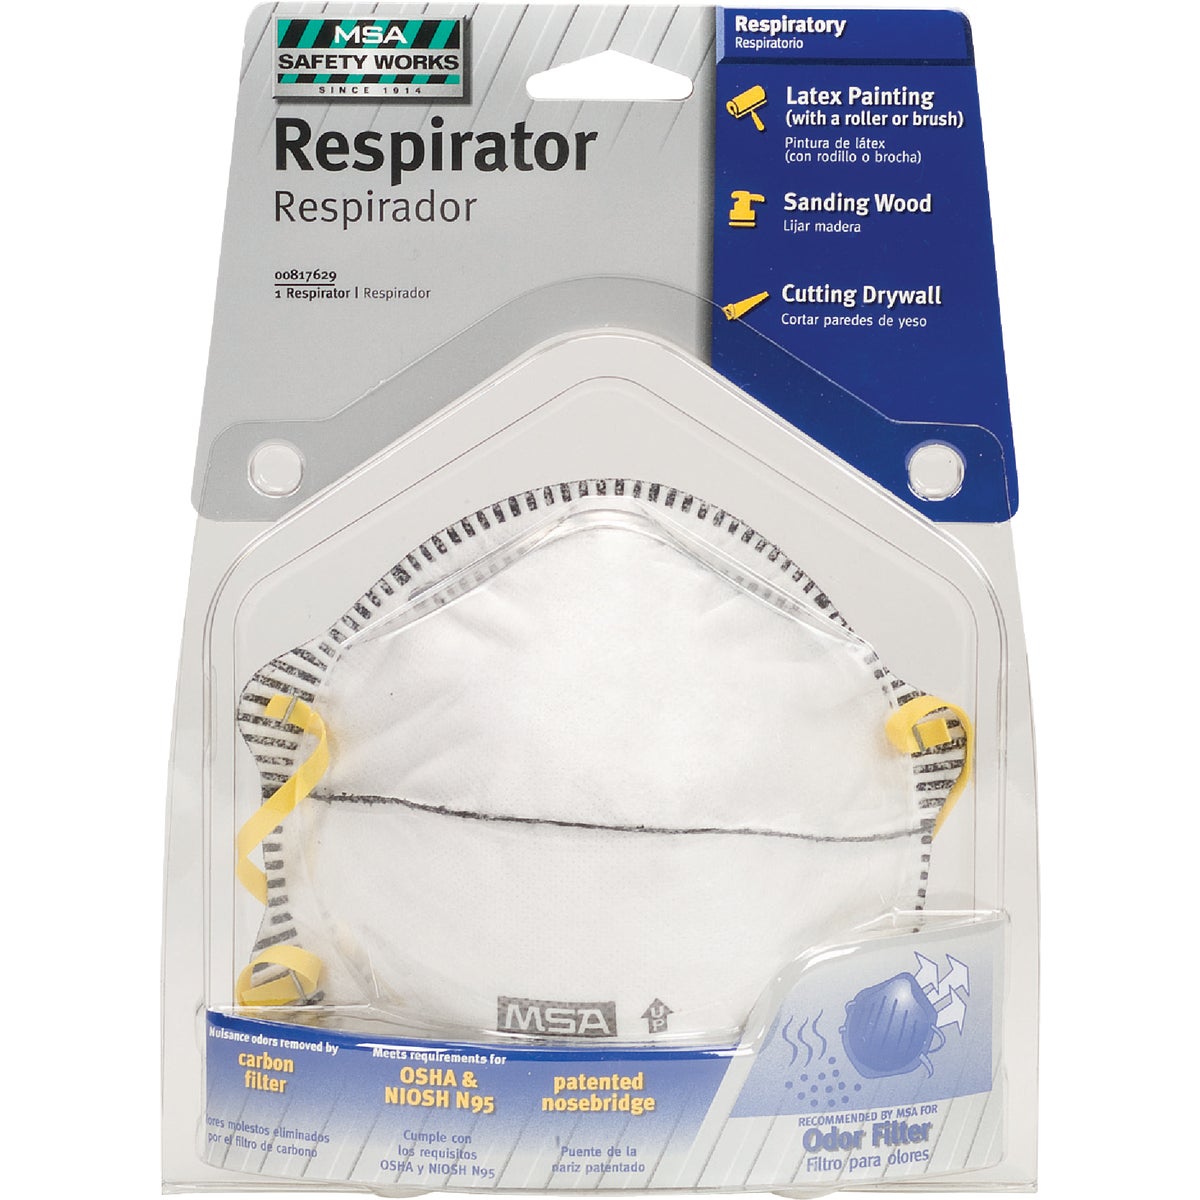 Safety Works N95 Harmful Dust Respirator with Odor Filter